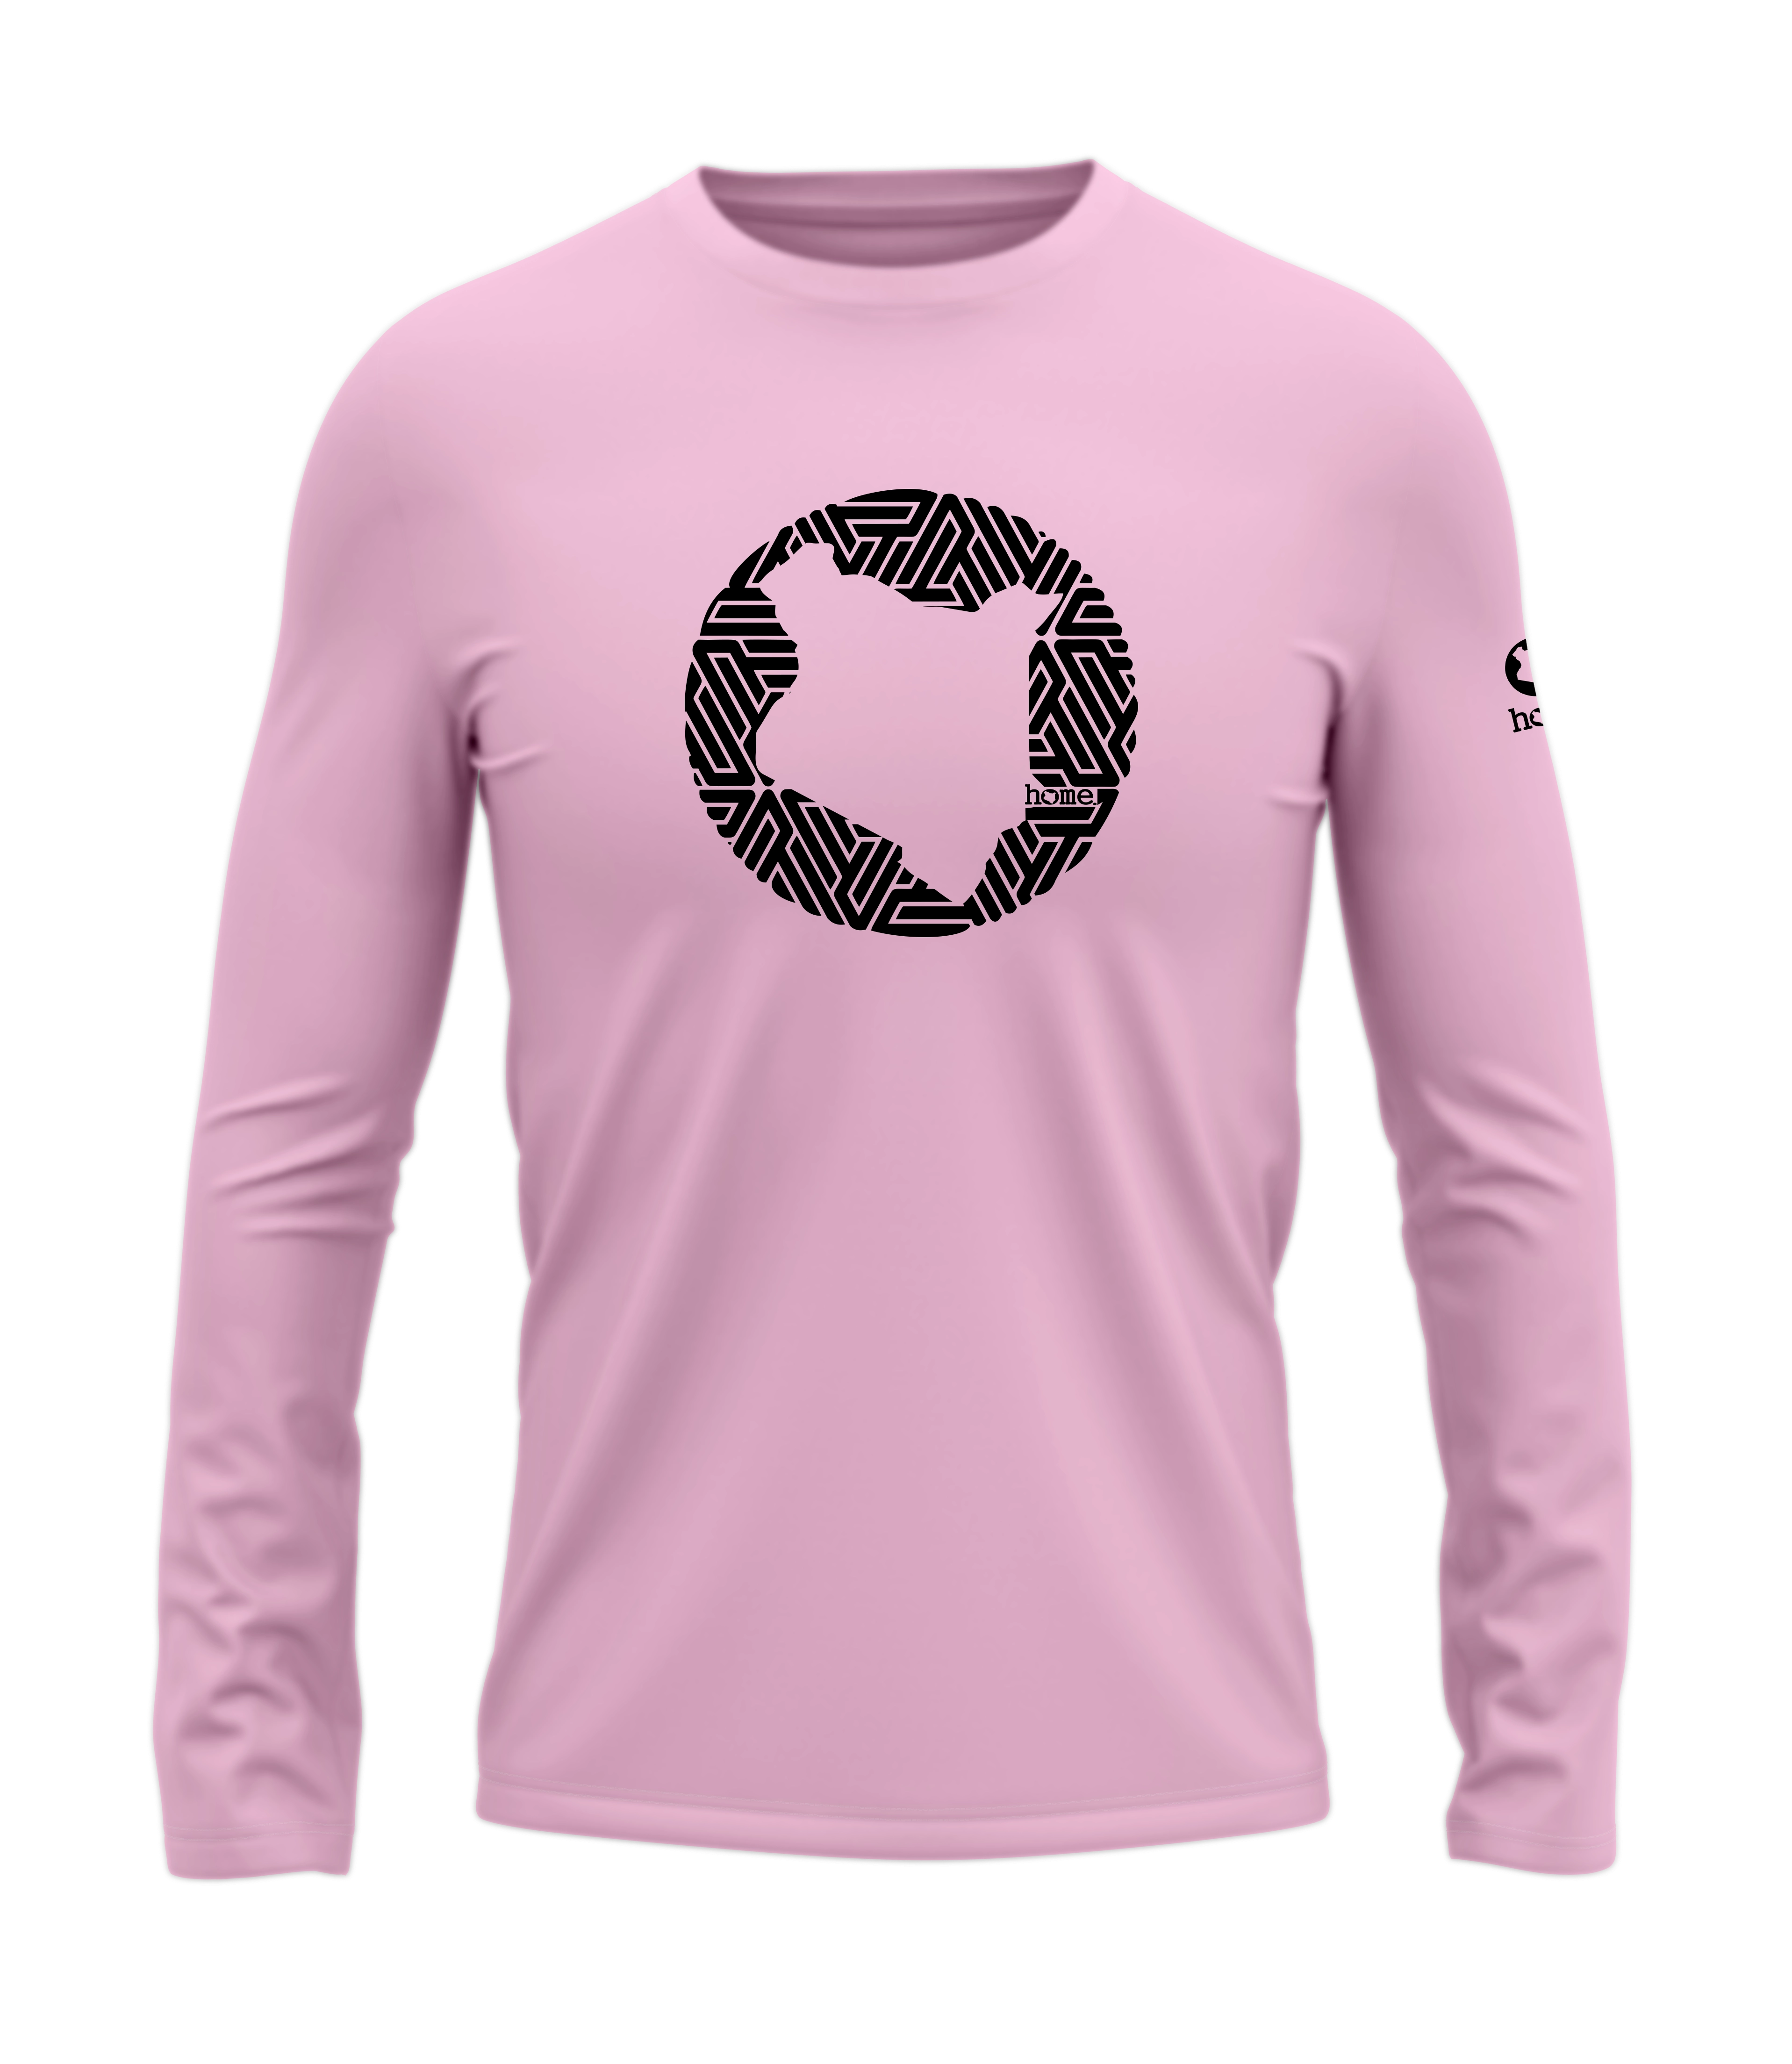 home_254 LONG-SLEEVED PINK T-SHIRT WITH A BLACK MAP PRINT – COTTON PLUS FABRIC